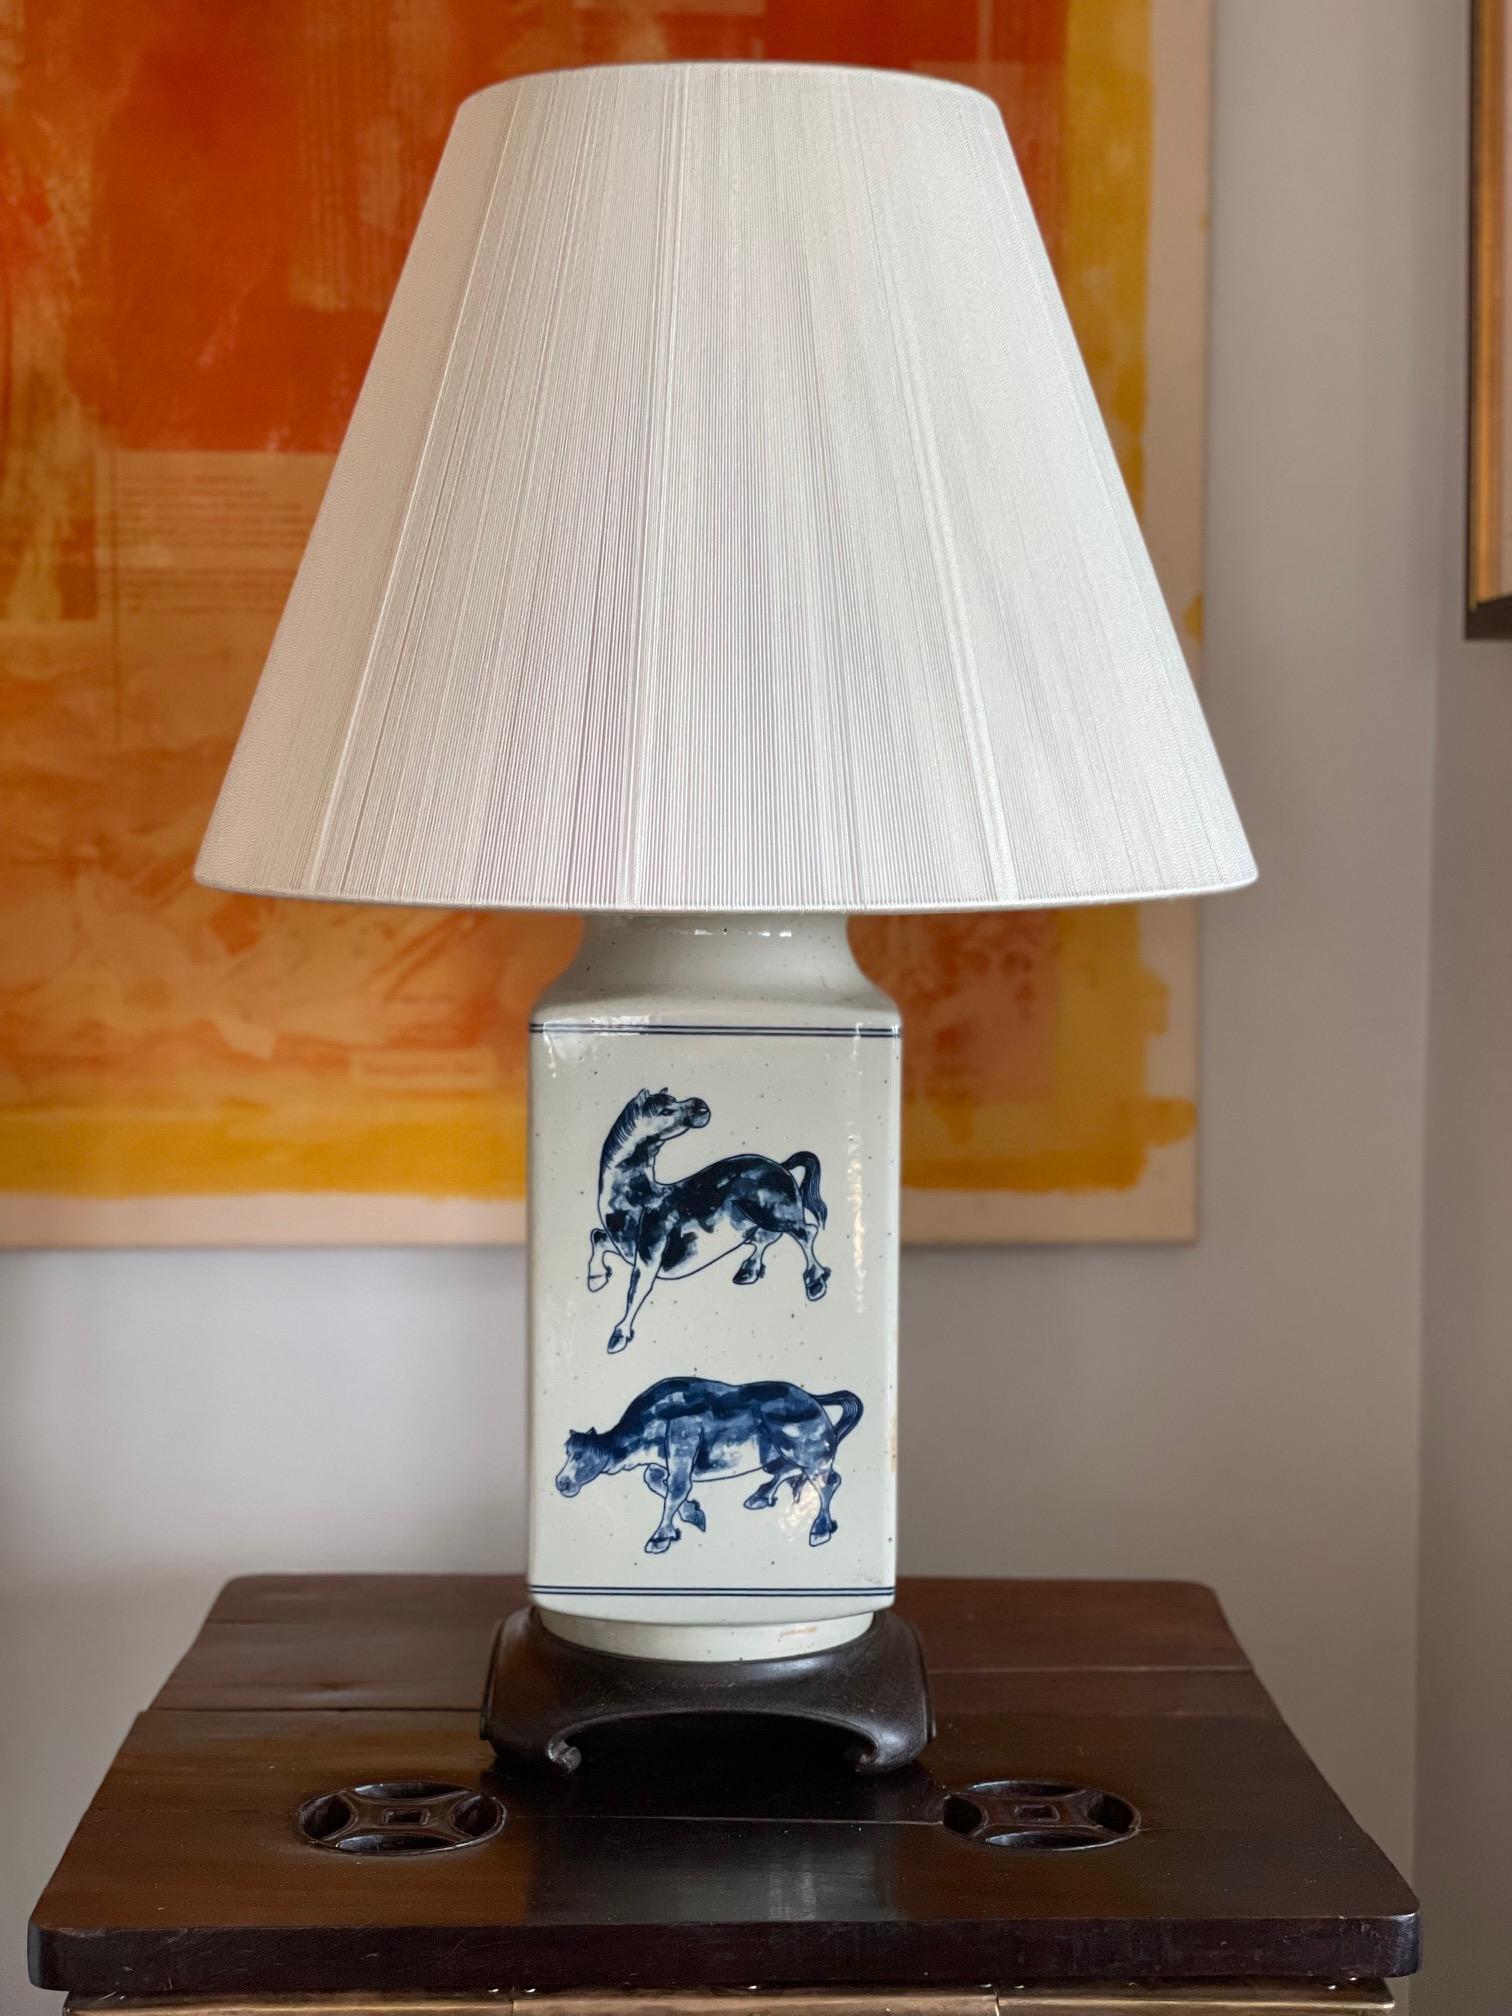 Pair of Unusual 20th century blue and white lamps, rectangular form, abstract horse design
Measures: 7